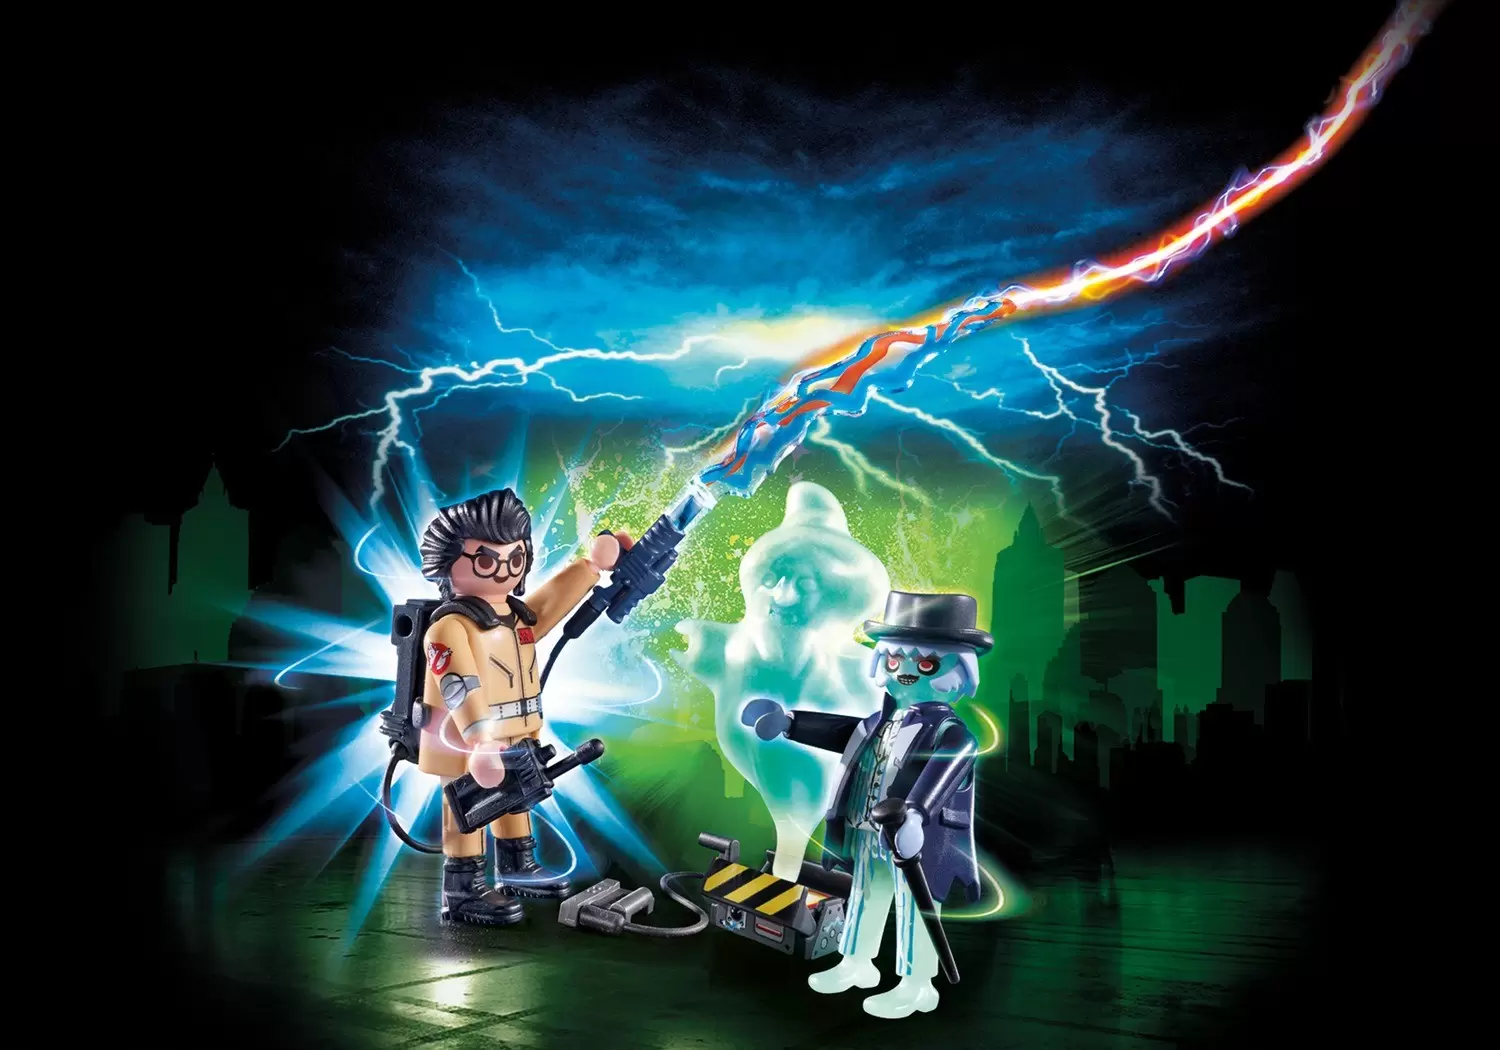 Playmobil Ghosbusters - Spengler and Ghost